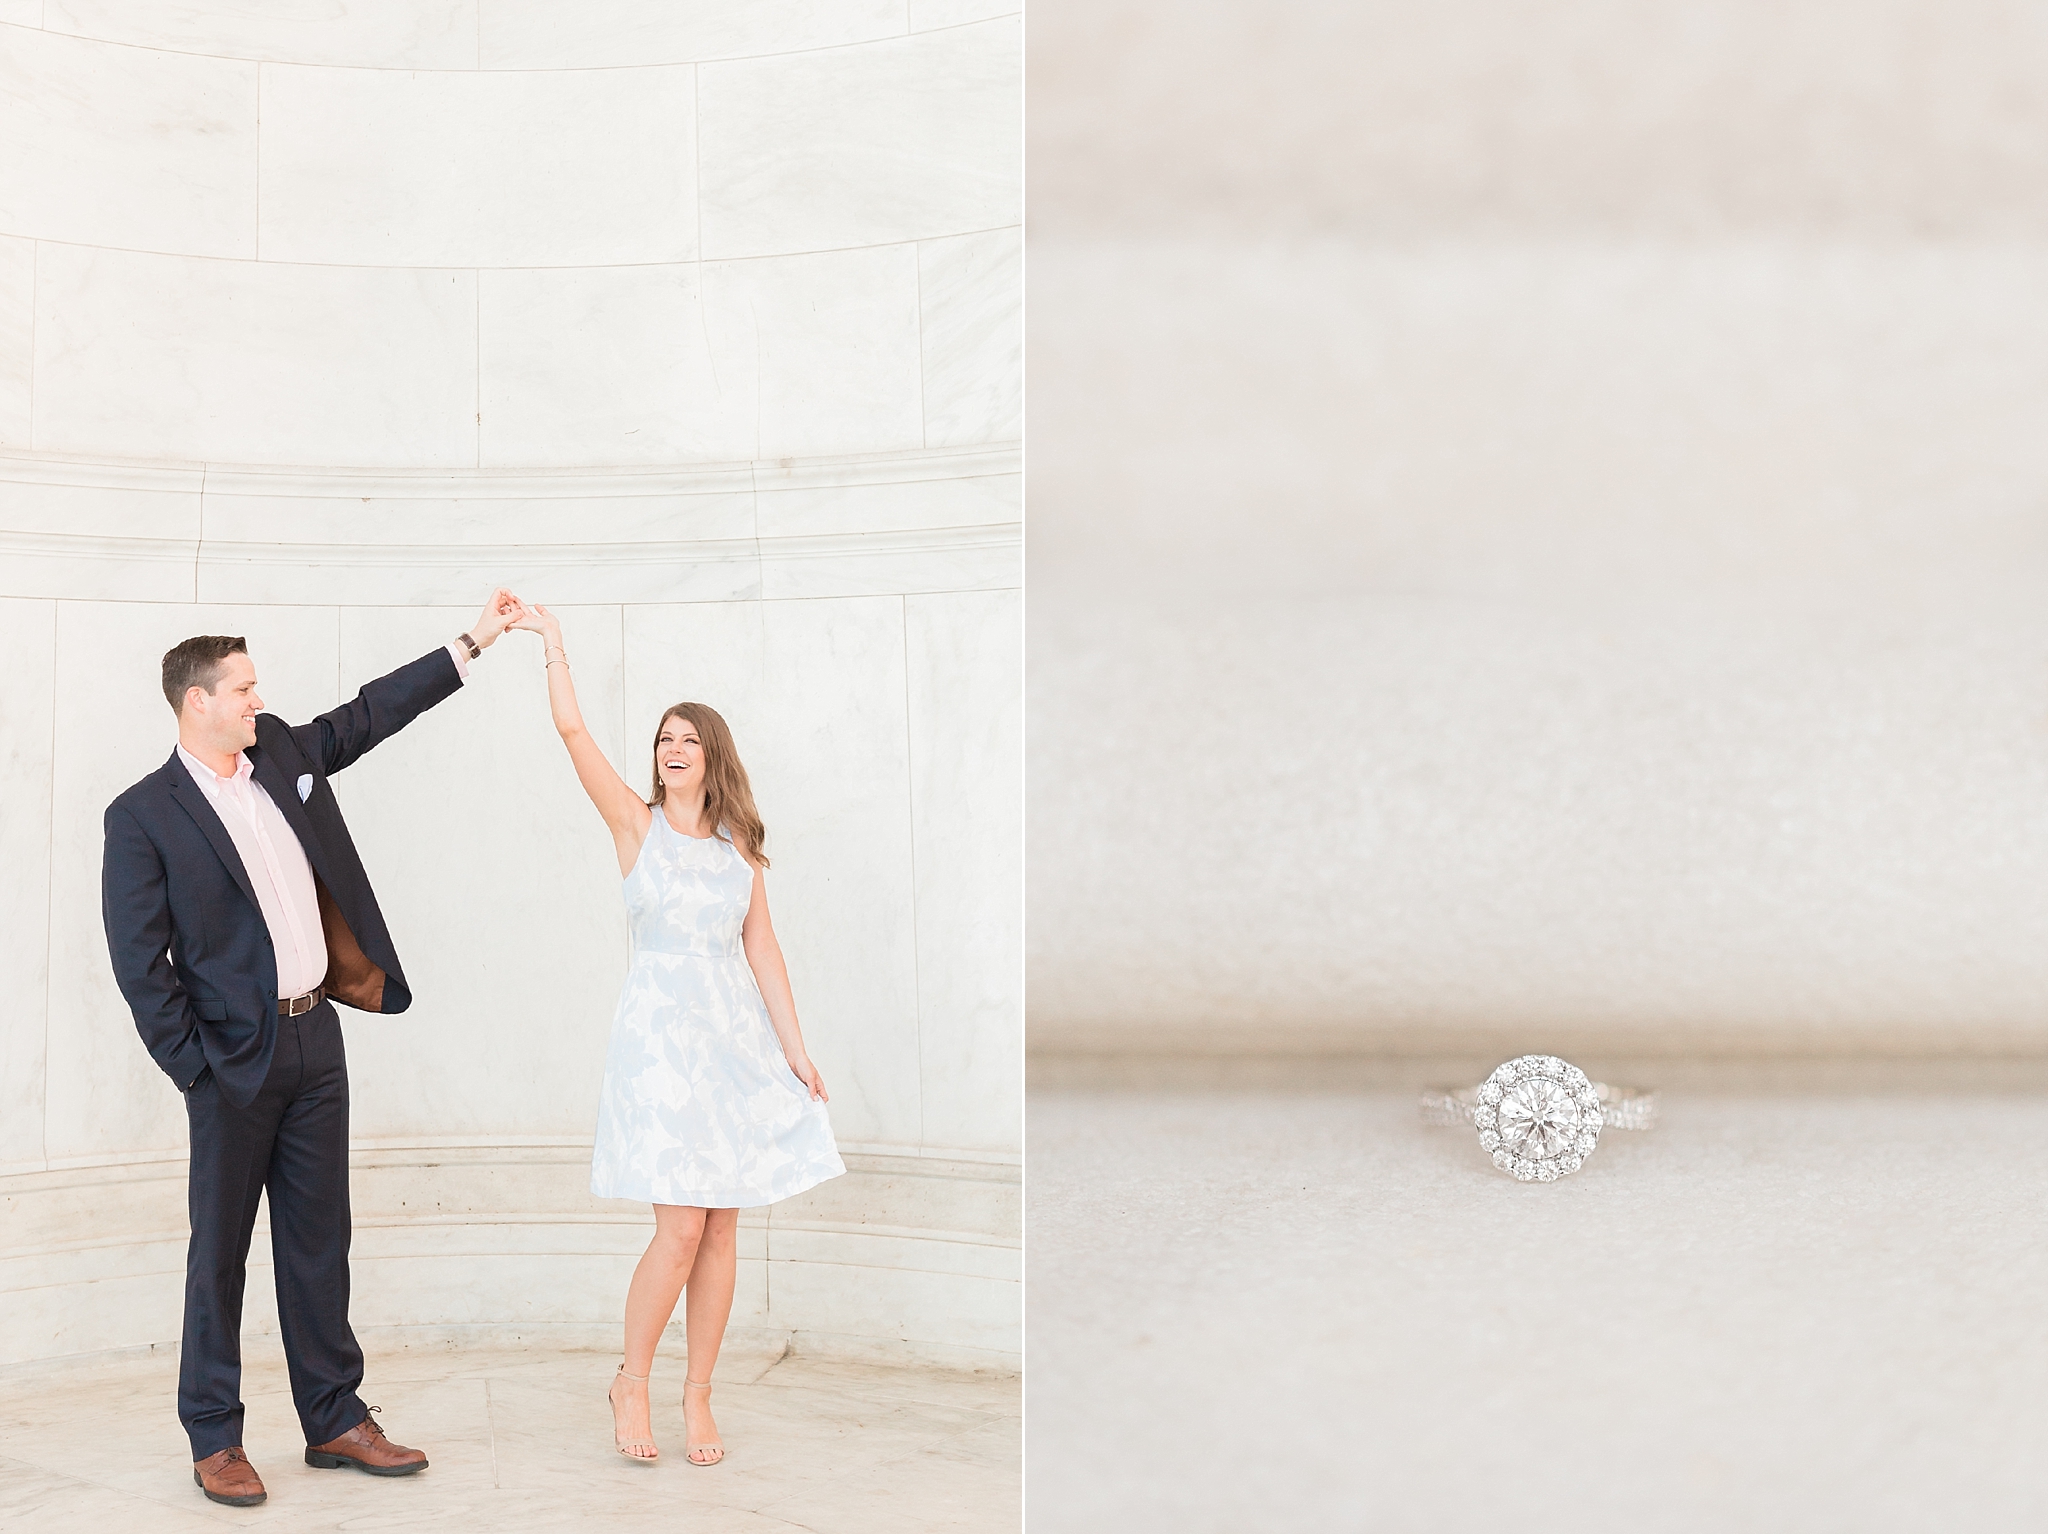 A summer sunrise engagement session is photographed by DC wedding photographer, Alicia Lacey, at the iconic Jefferson Memorial.